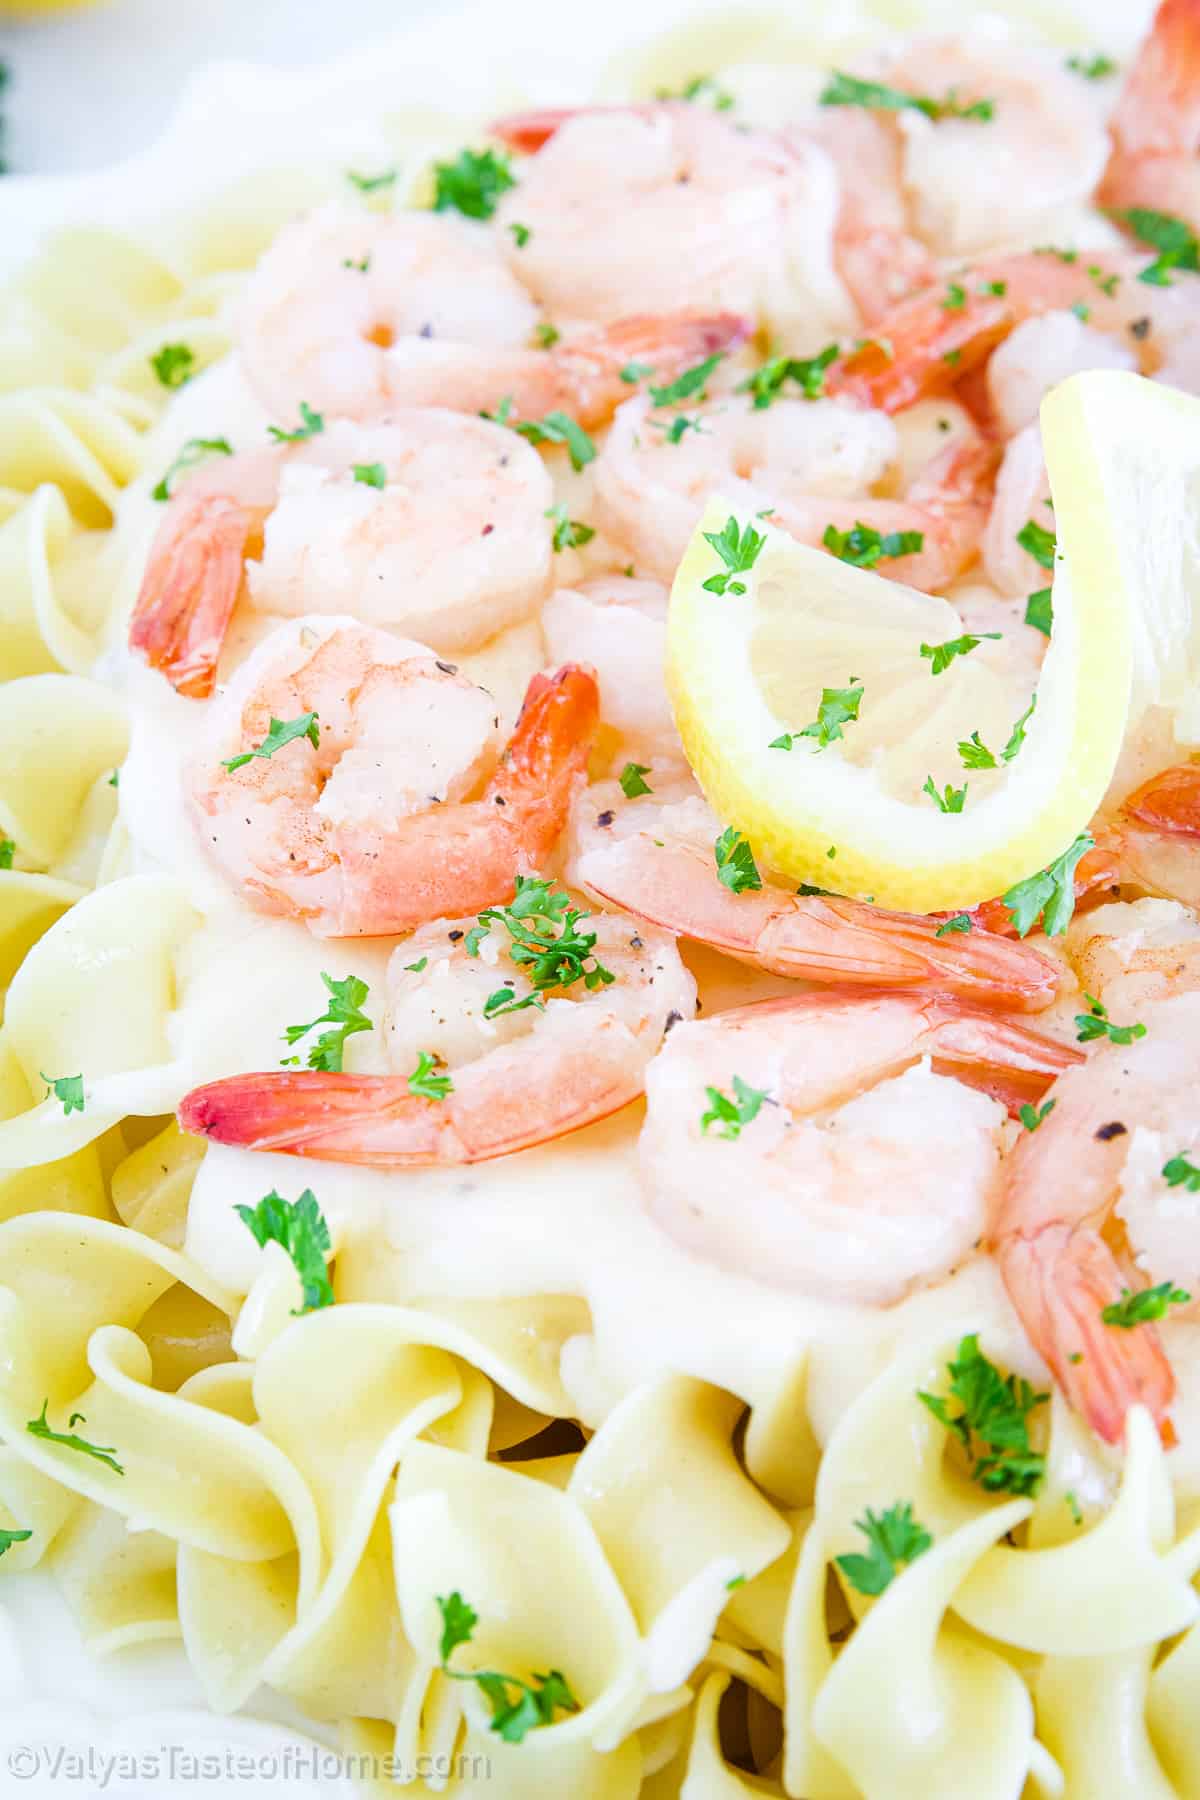 This Shrimp Alfredo Pasta is incredibly easy to make and will give you perfectly cooked shrimp in a creamy homemade Alfredo sauce, and pasta.